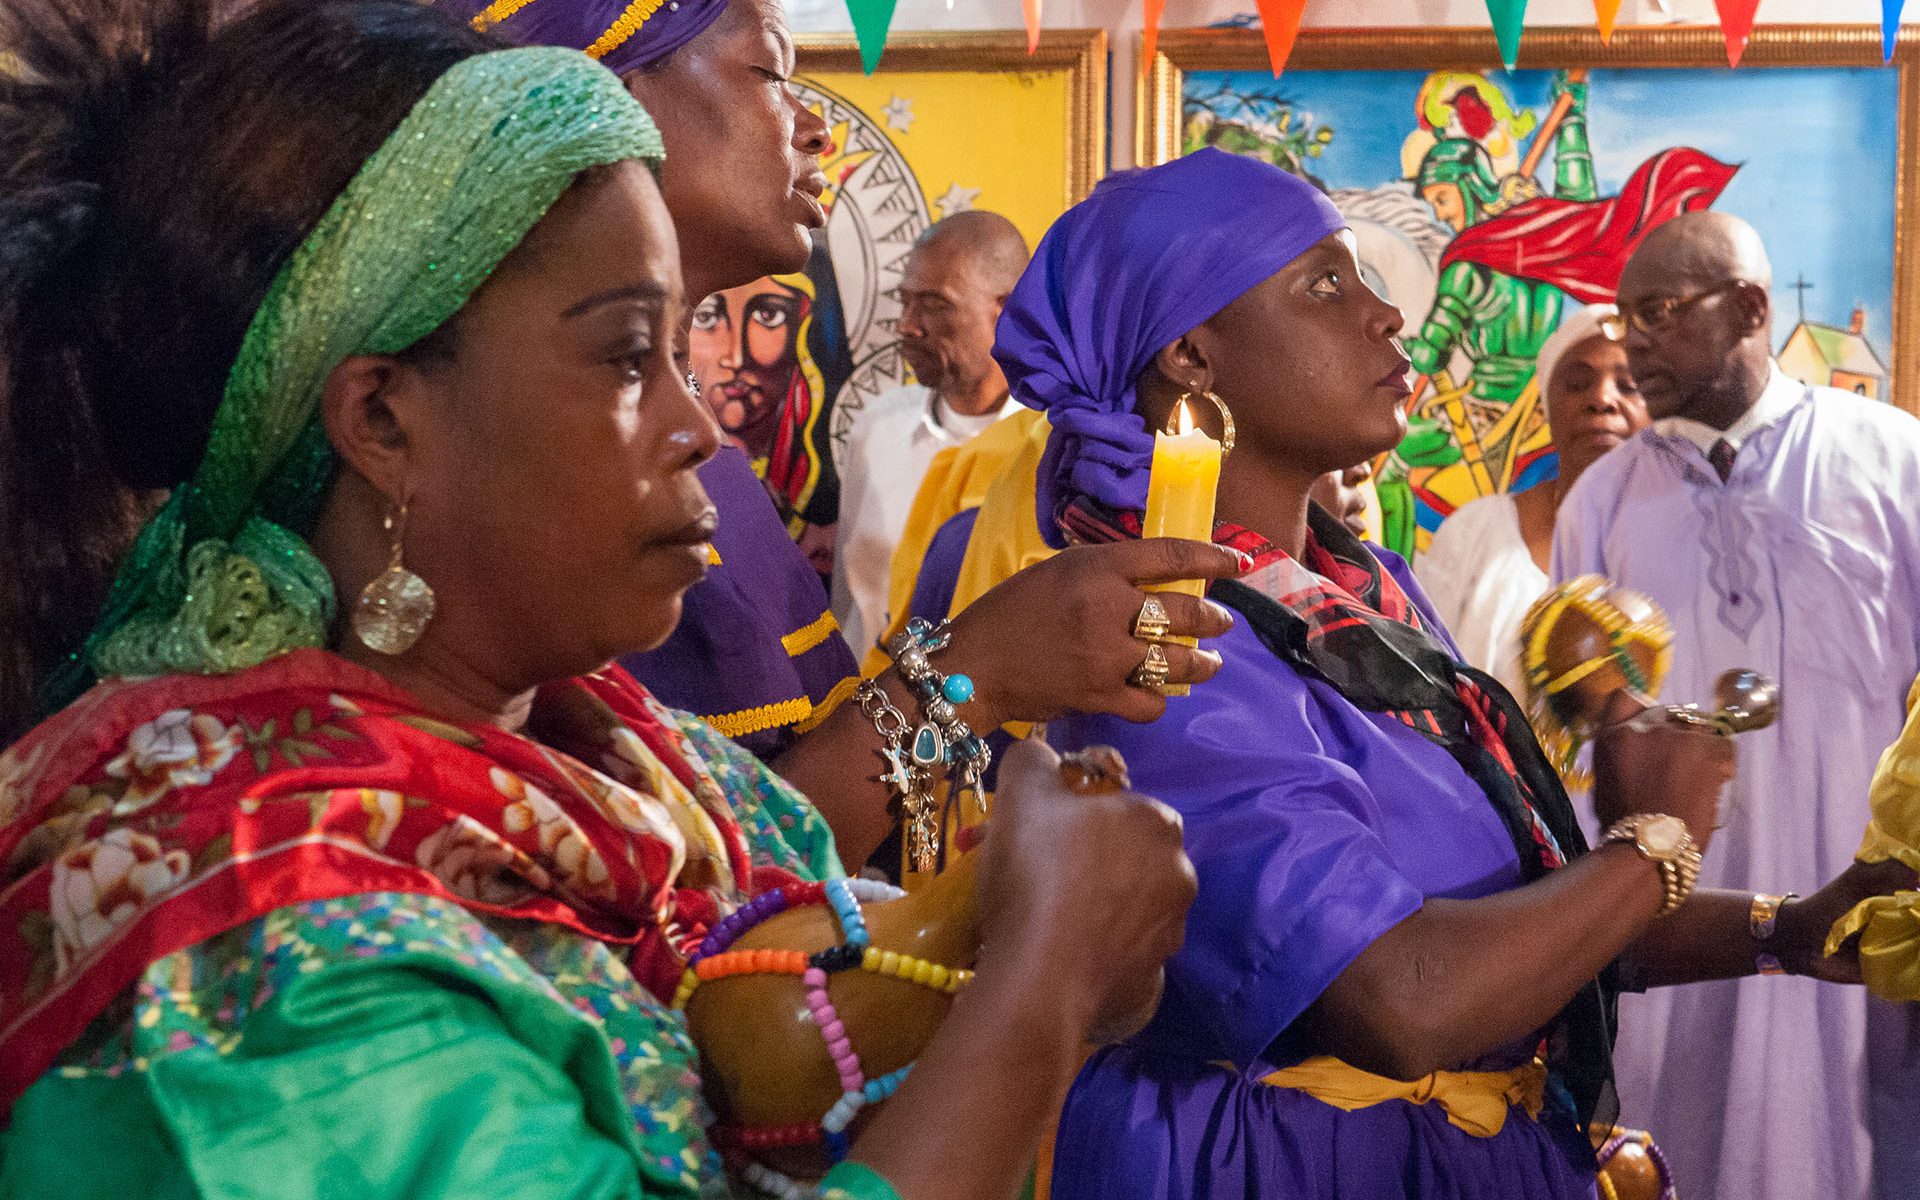 Haitian women adorned in vivid colors hold candles and instruments